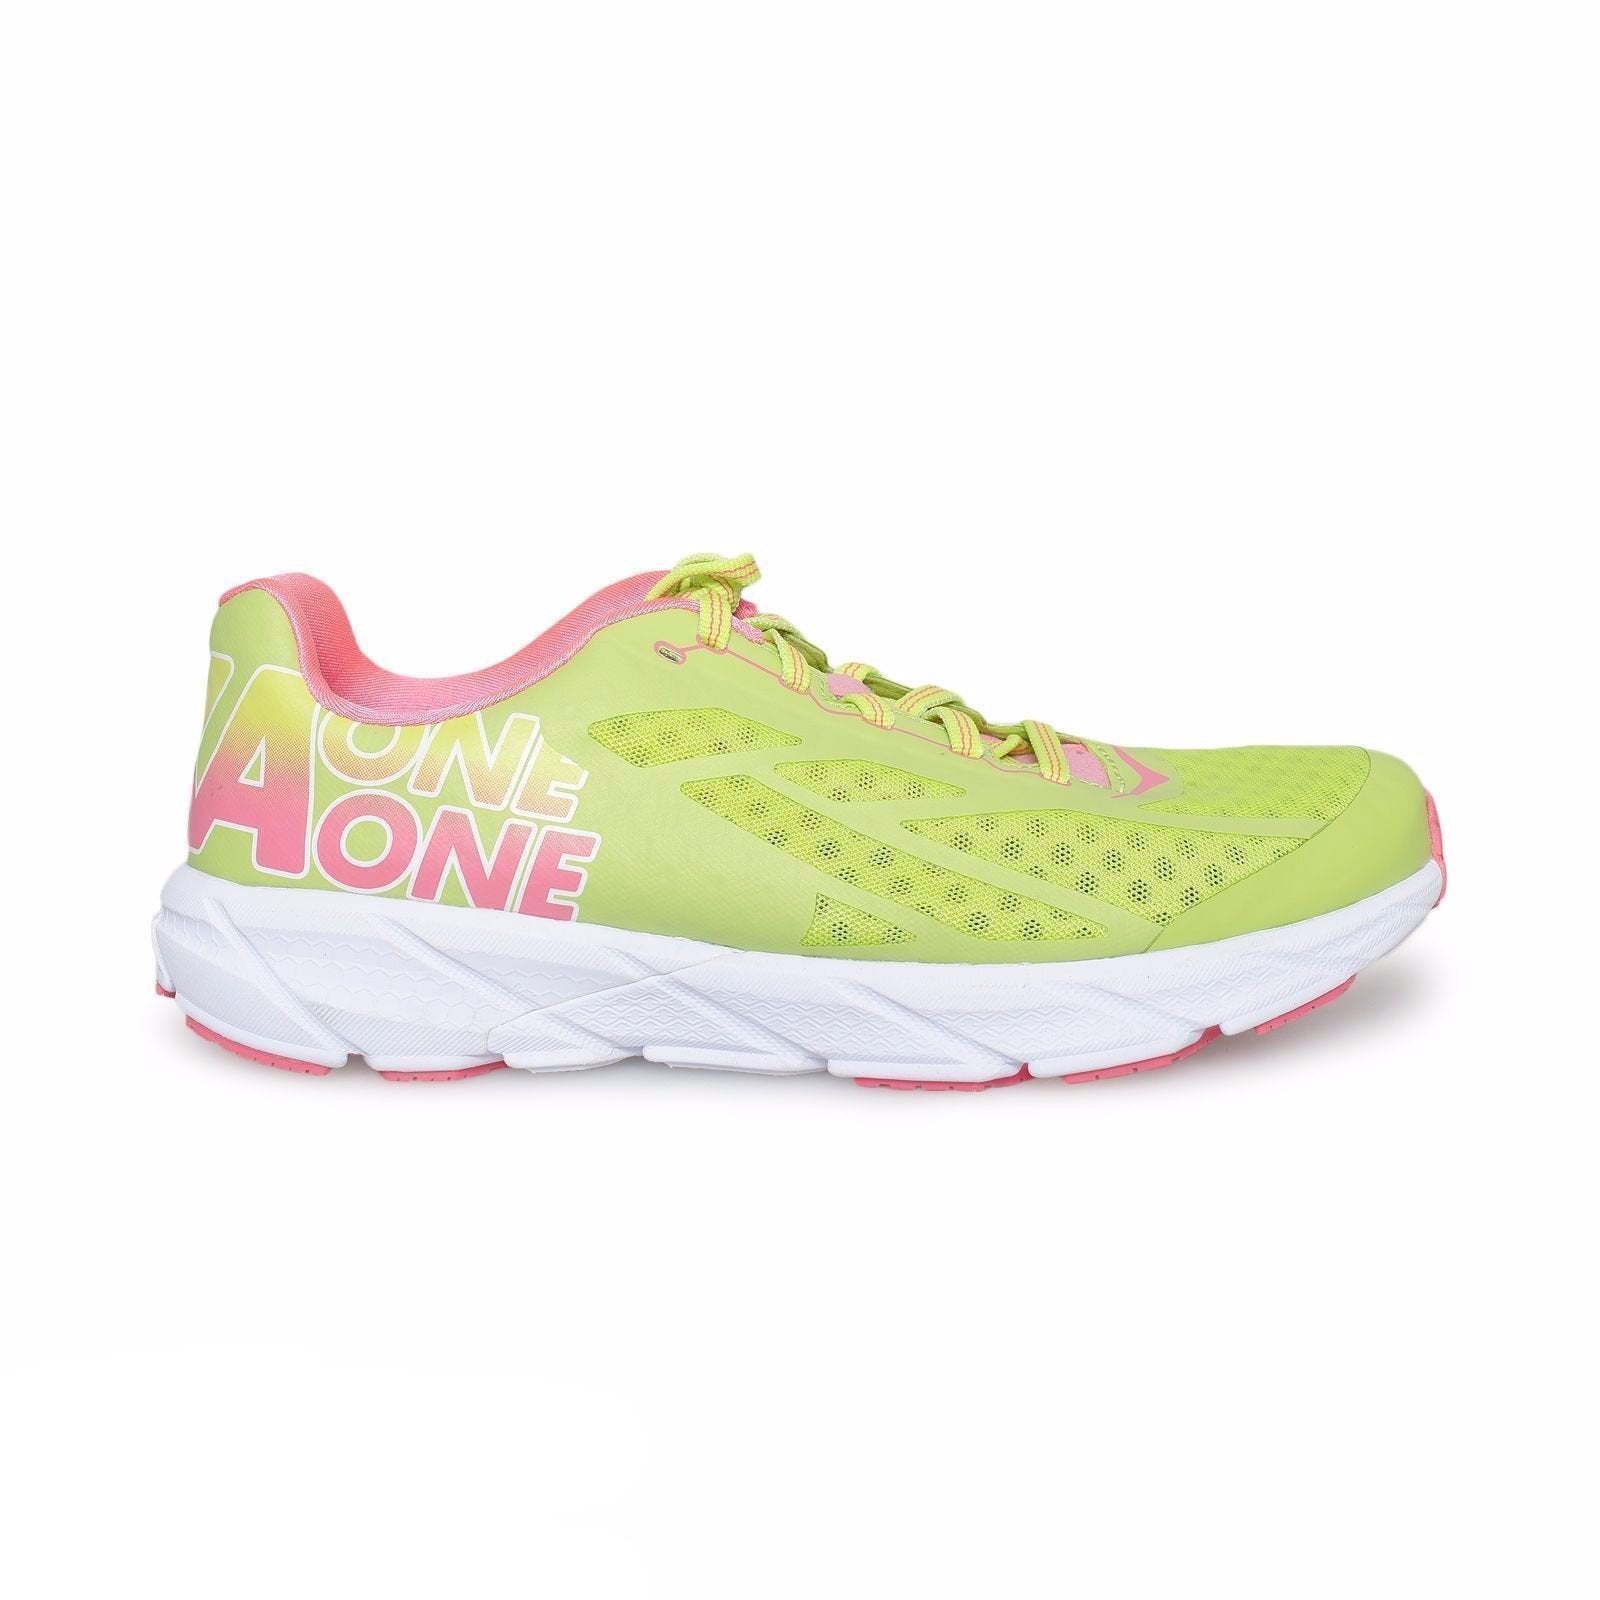 bright green running shoes